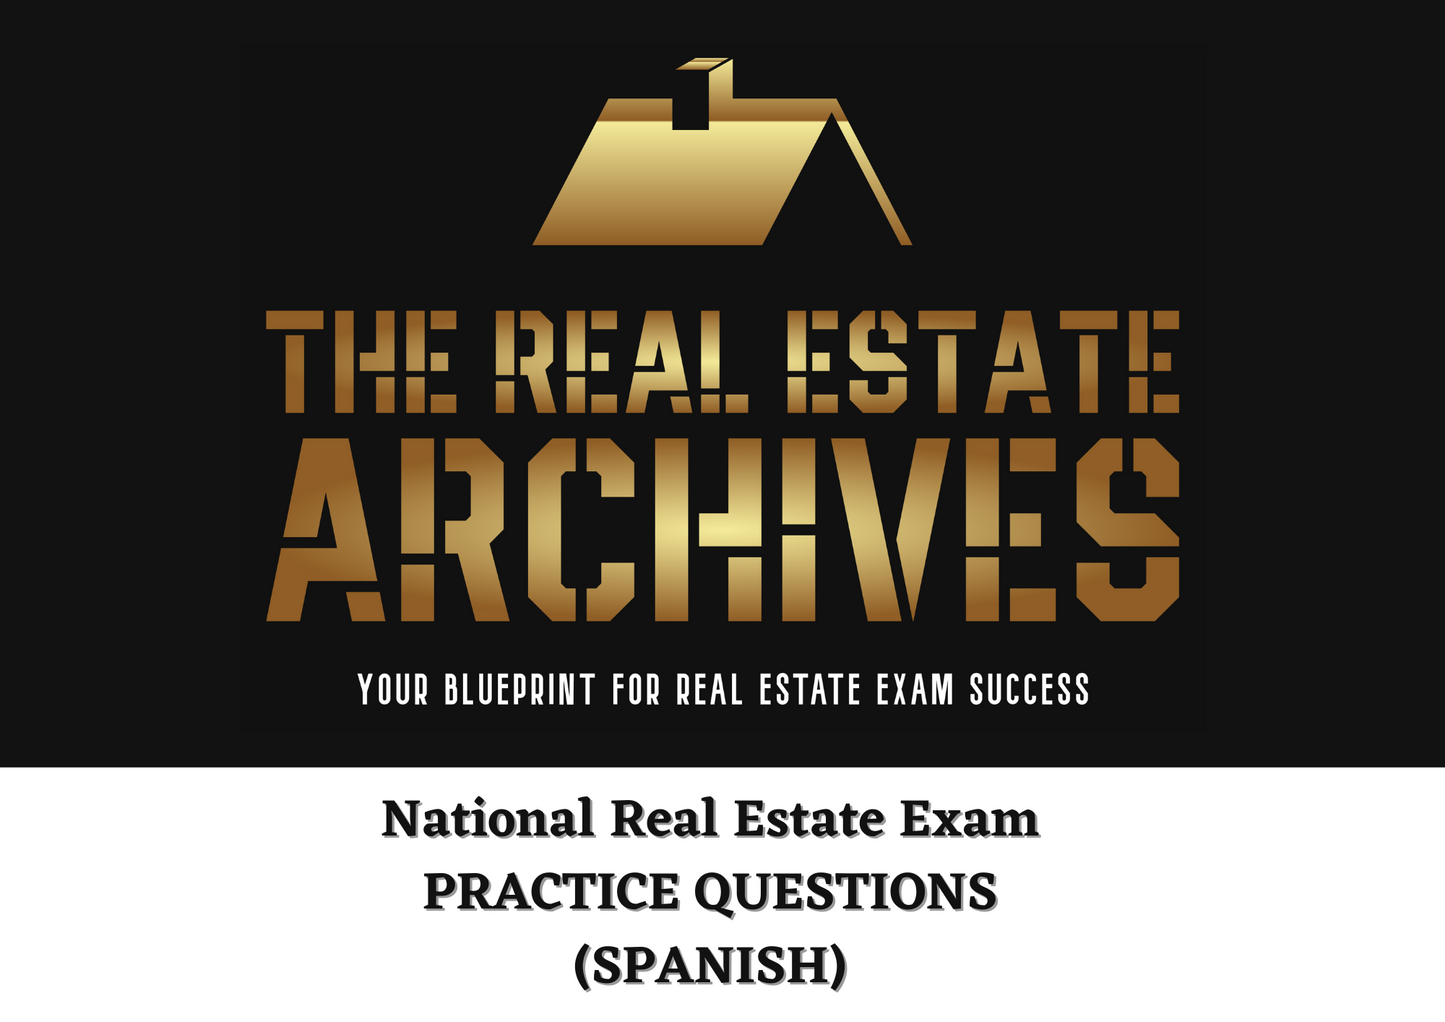 National Real Estate Exam Practice Questions (Spanish)